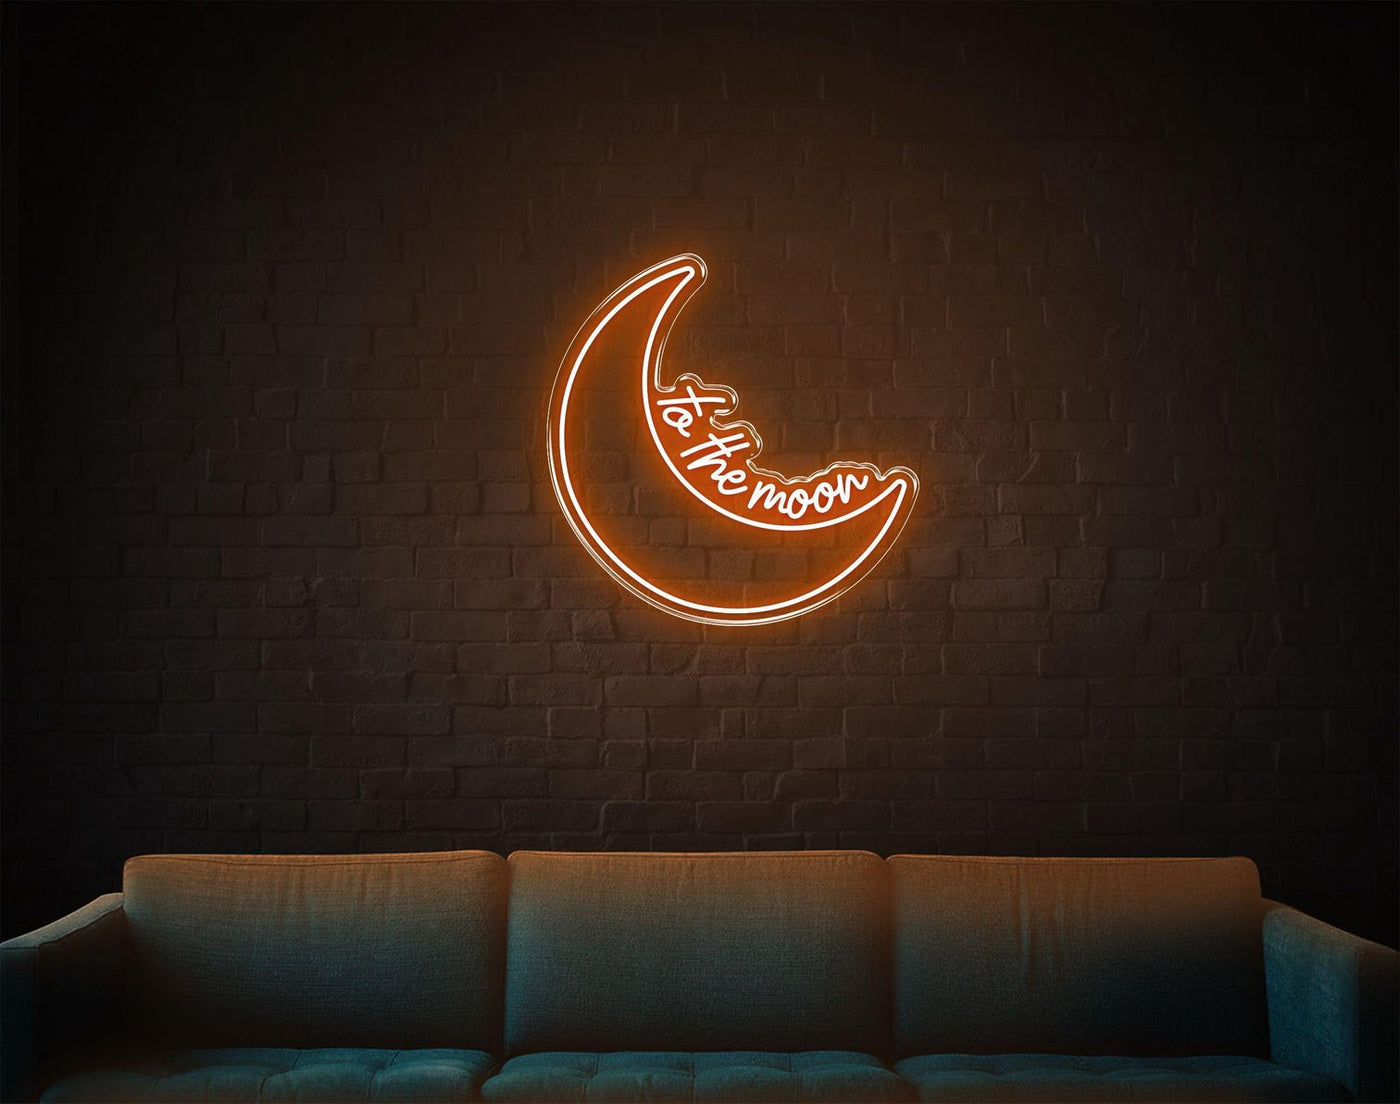 To The Moon LED neon sign - 30inch x 30inchDark Orange